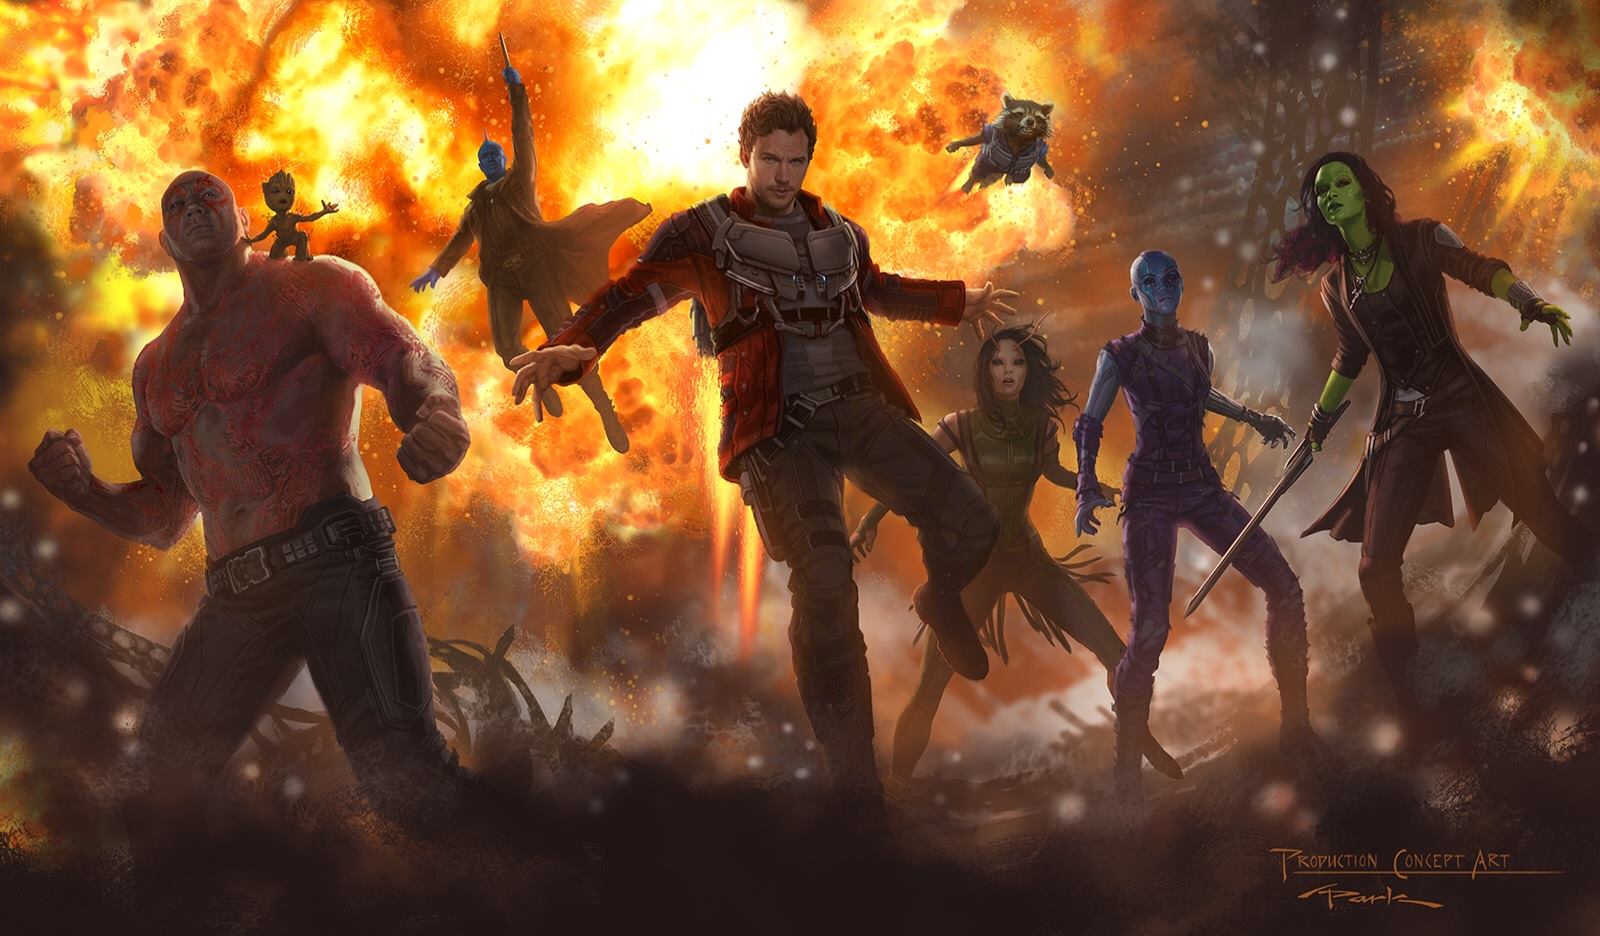 First Look at ‘Guardians of the Galaxy Vol. 2’